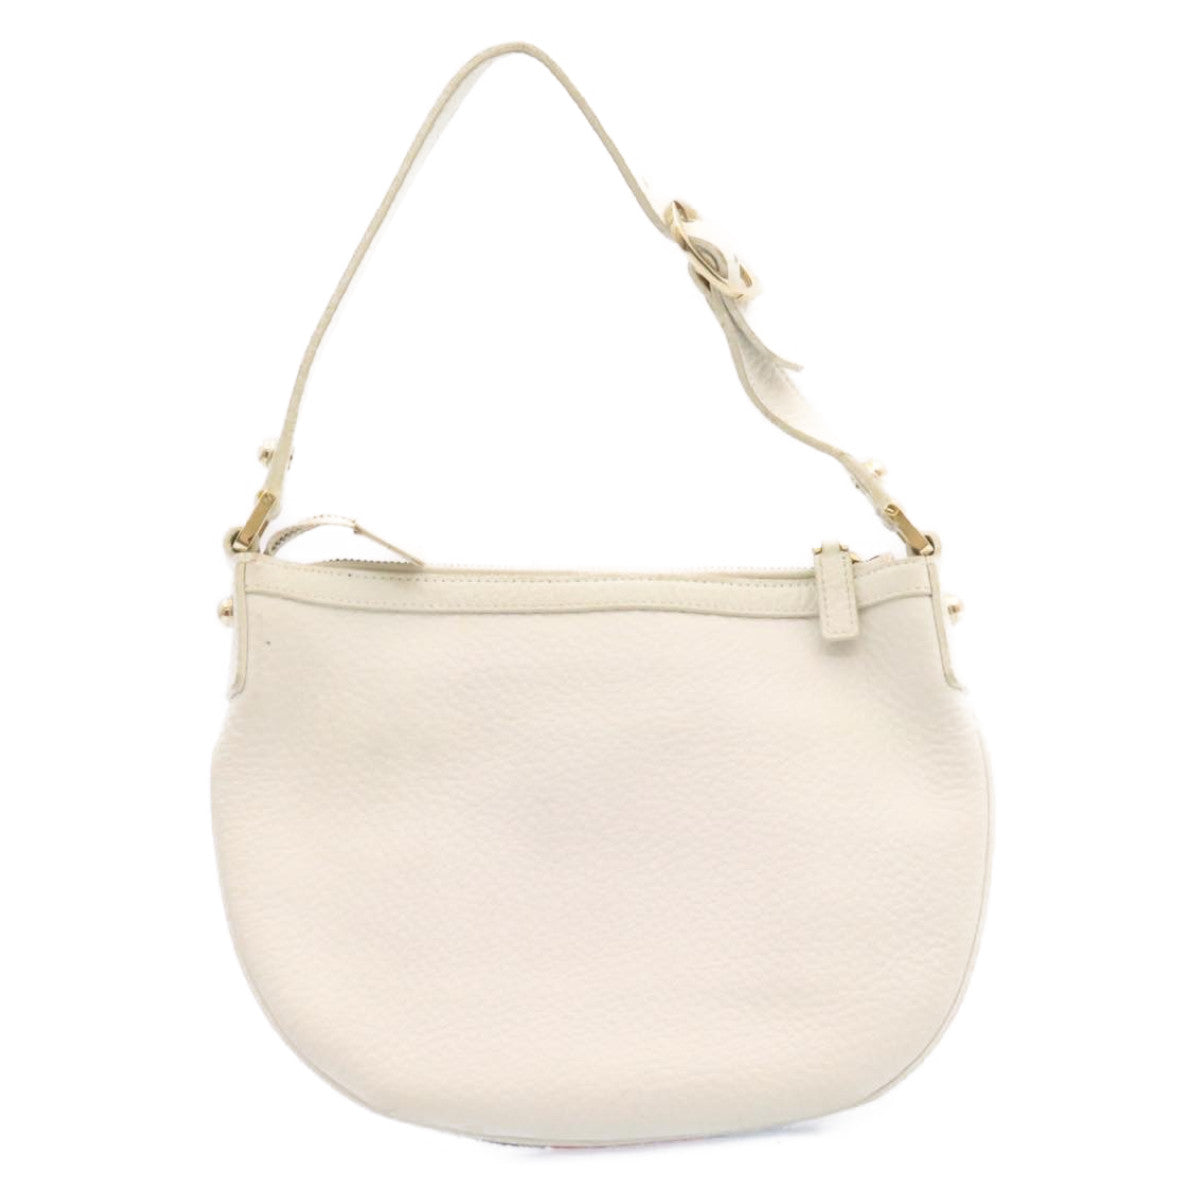 GUCCI Sherry Line Hand Bag Leather White Auth am1337s